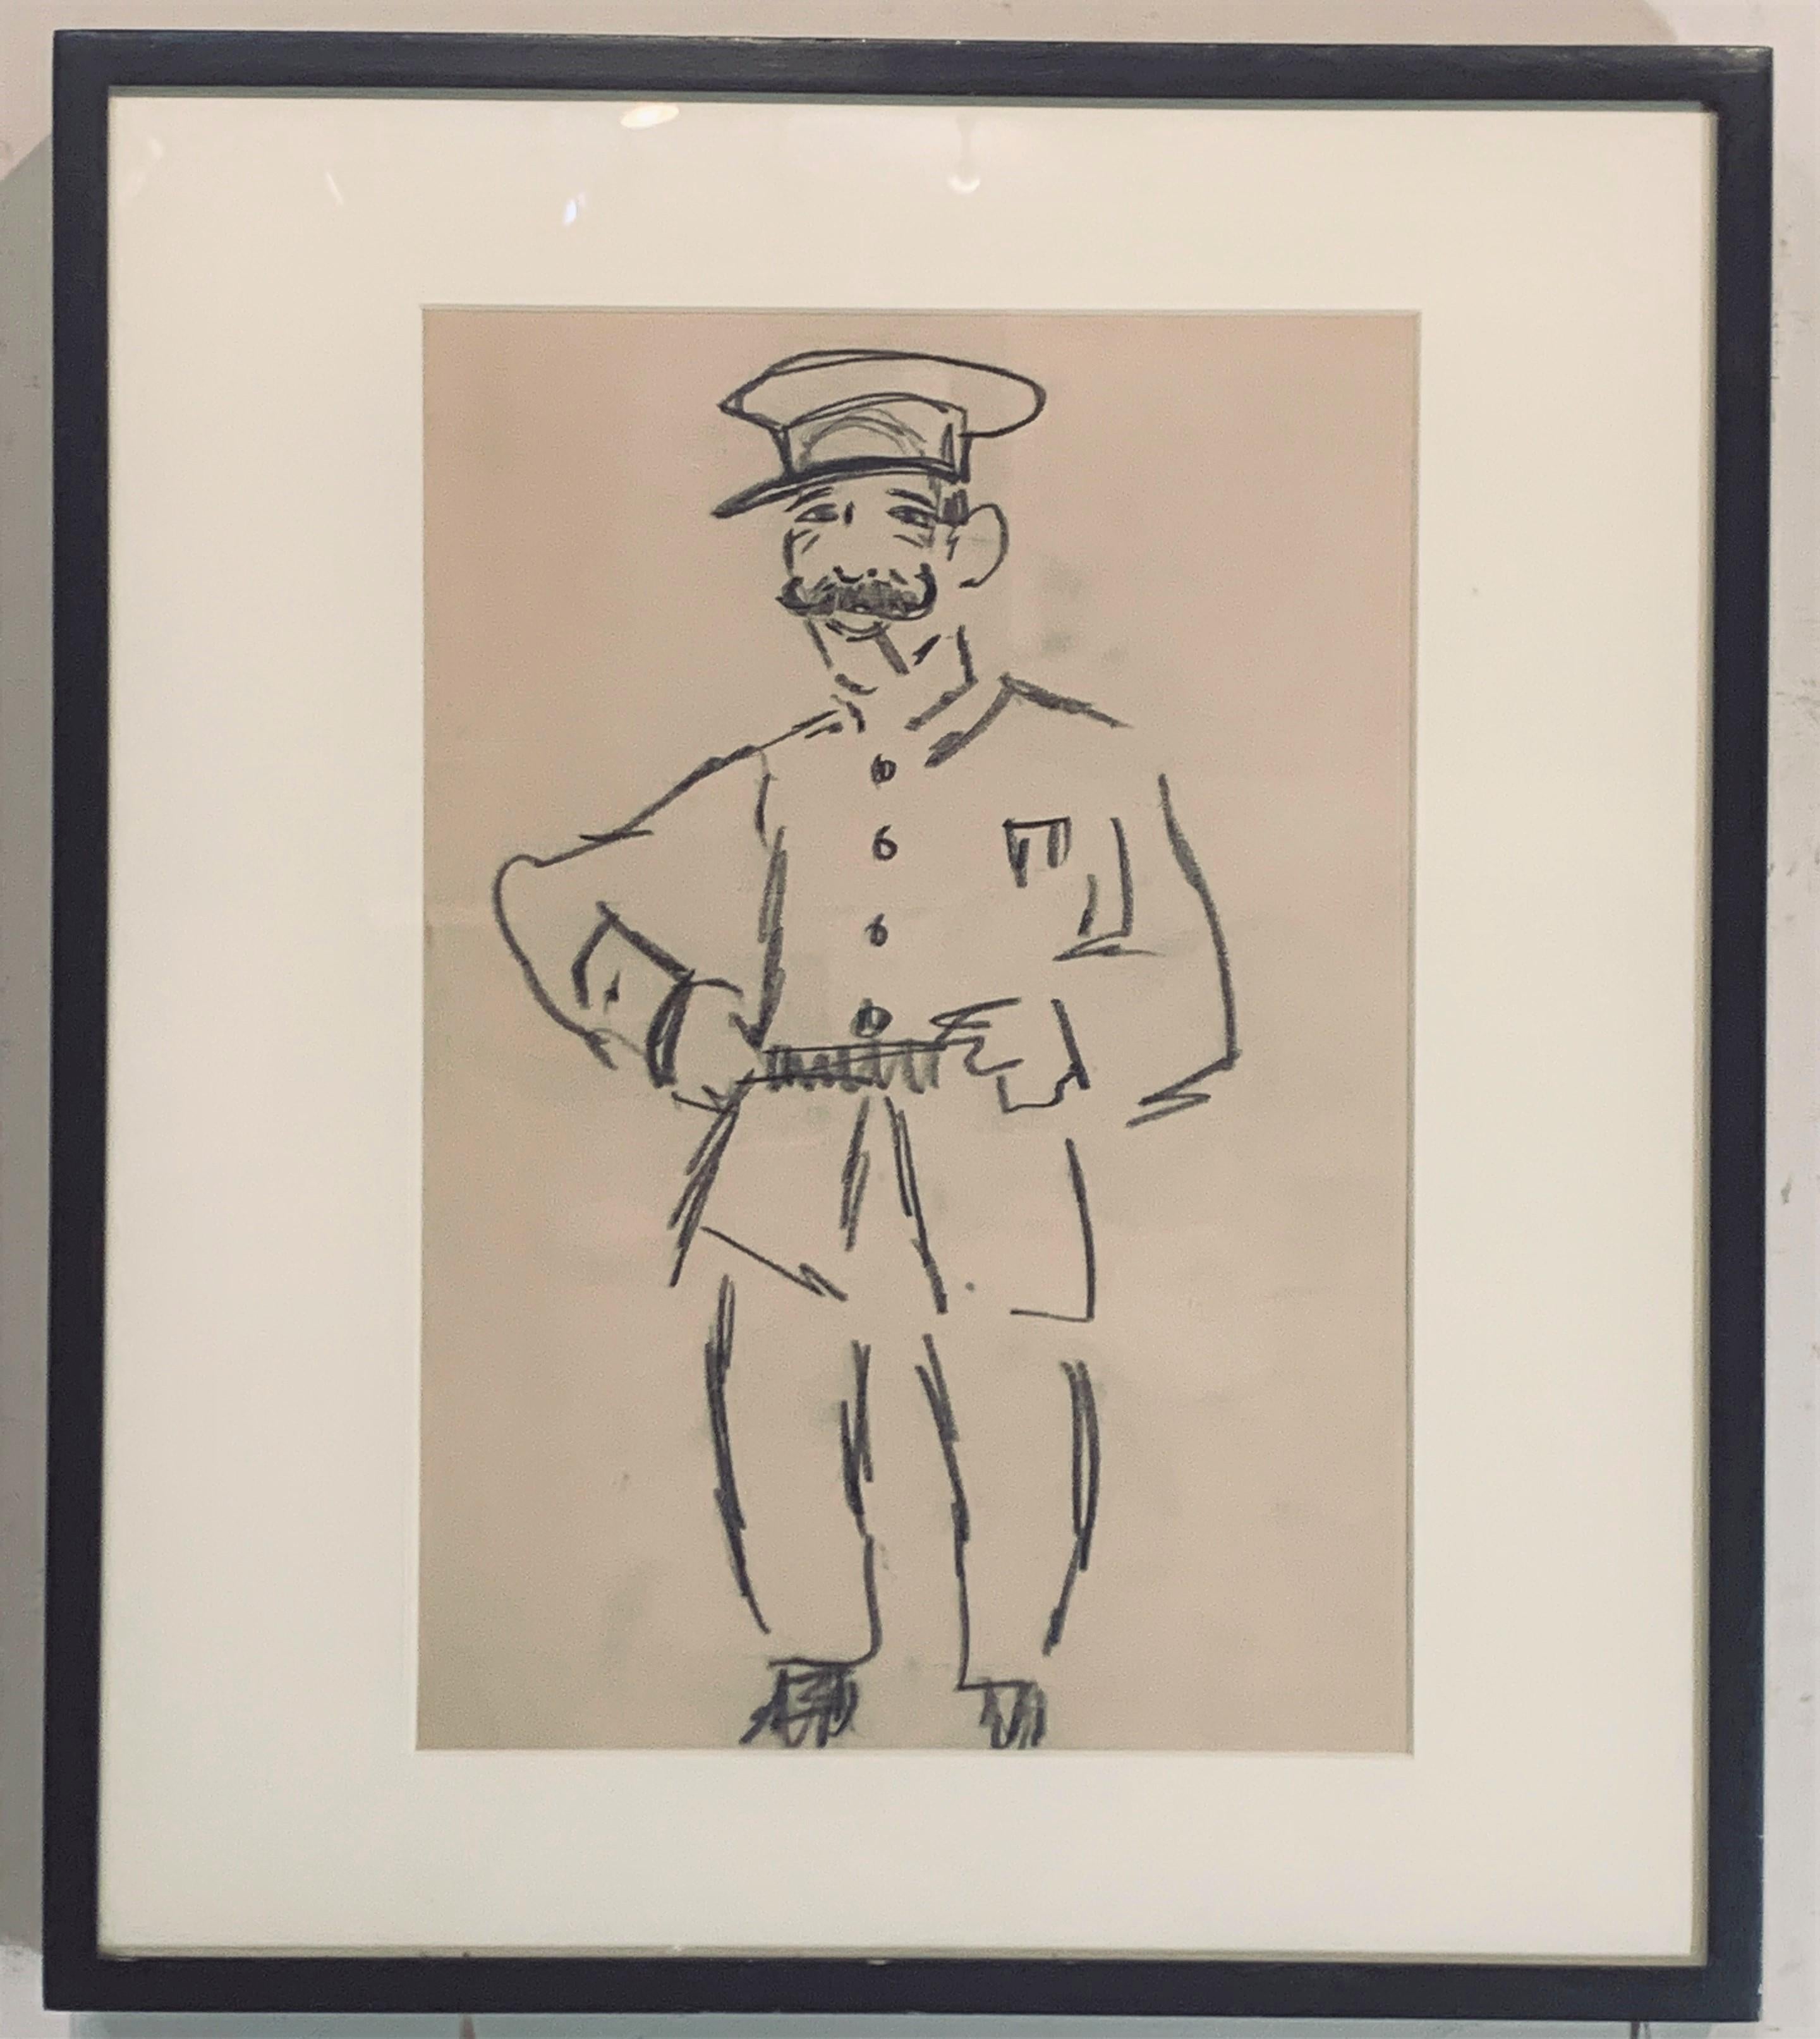 Provenance:  Sotheby's NY, bought with a group of drawings by Robert Henri, this sketch of a French "gardonne" (Police man) is framed and matted.  18" x 16" in a black frame.  Marjorie Organ, born in Ireland in 1886, was one of the first female